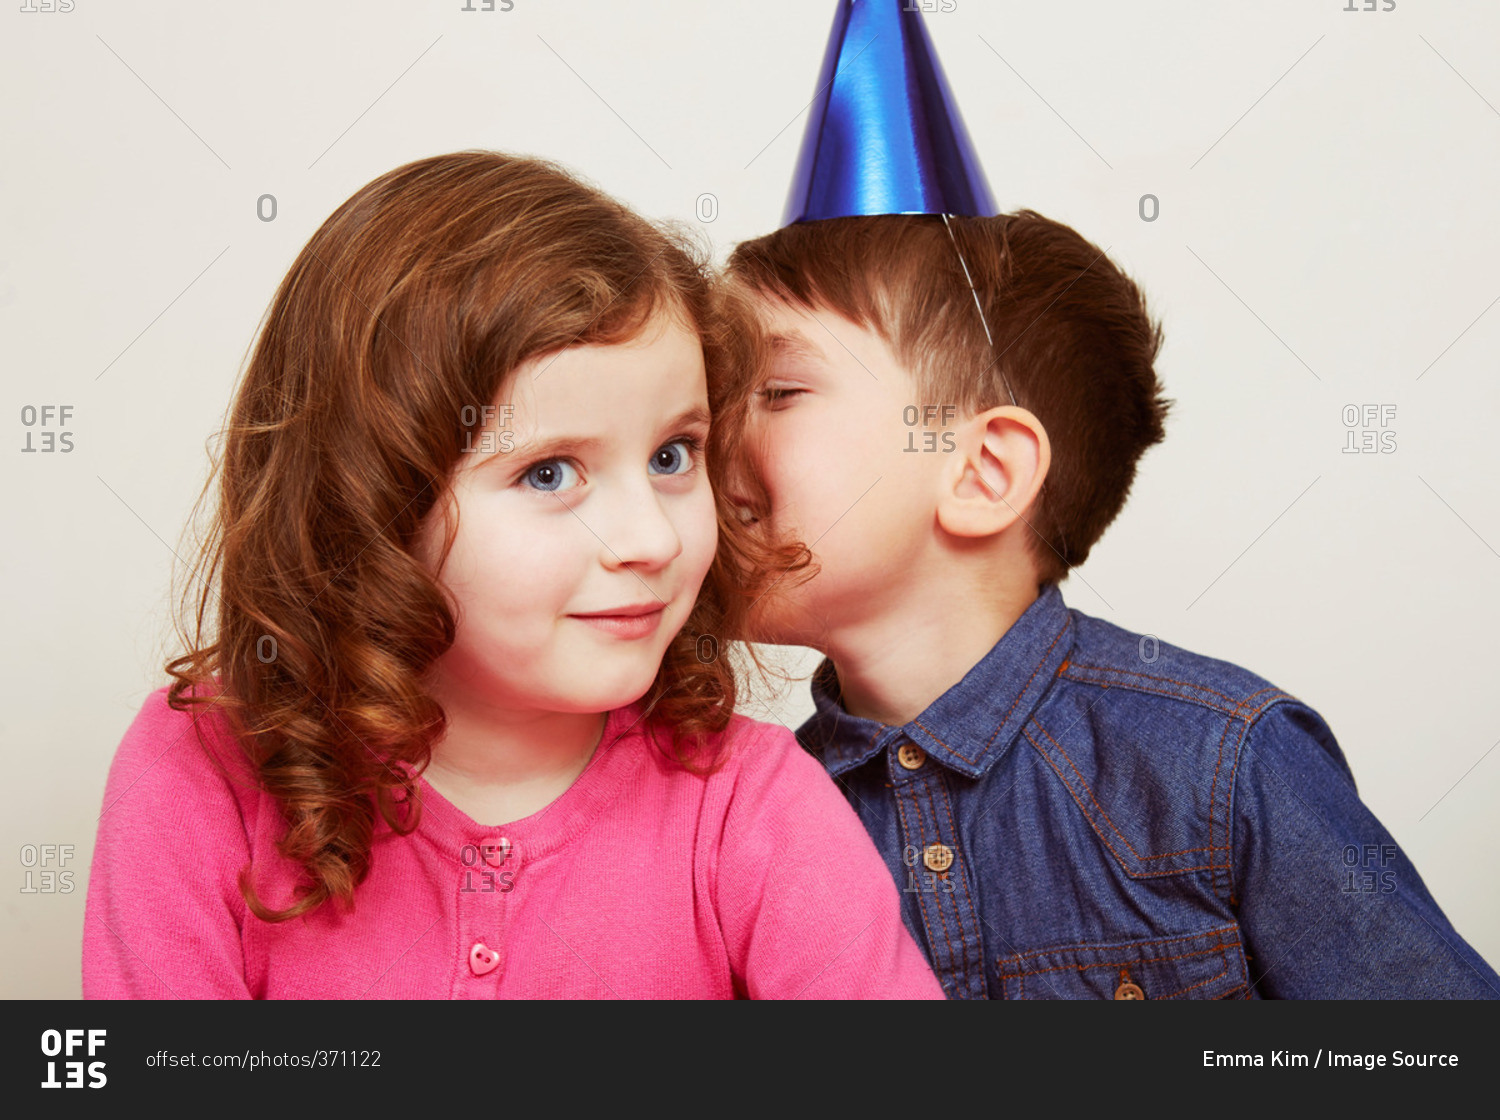 Boy wearing party hat whispering to girl